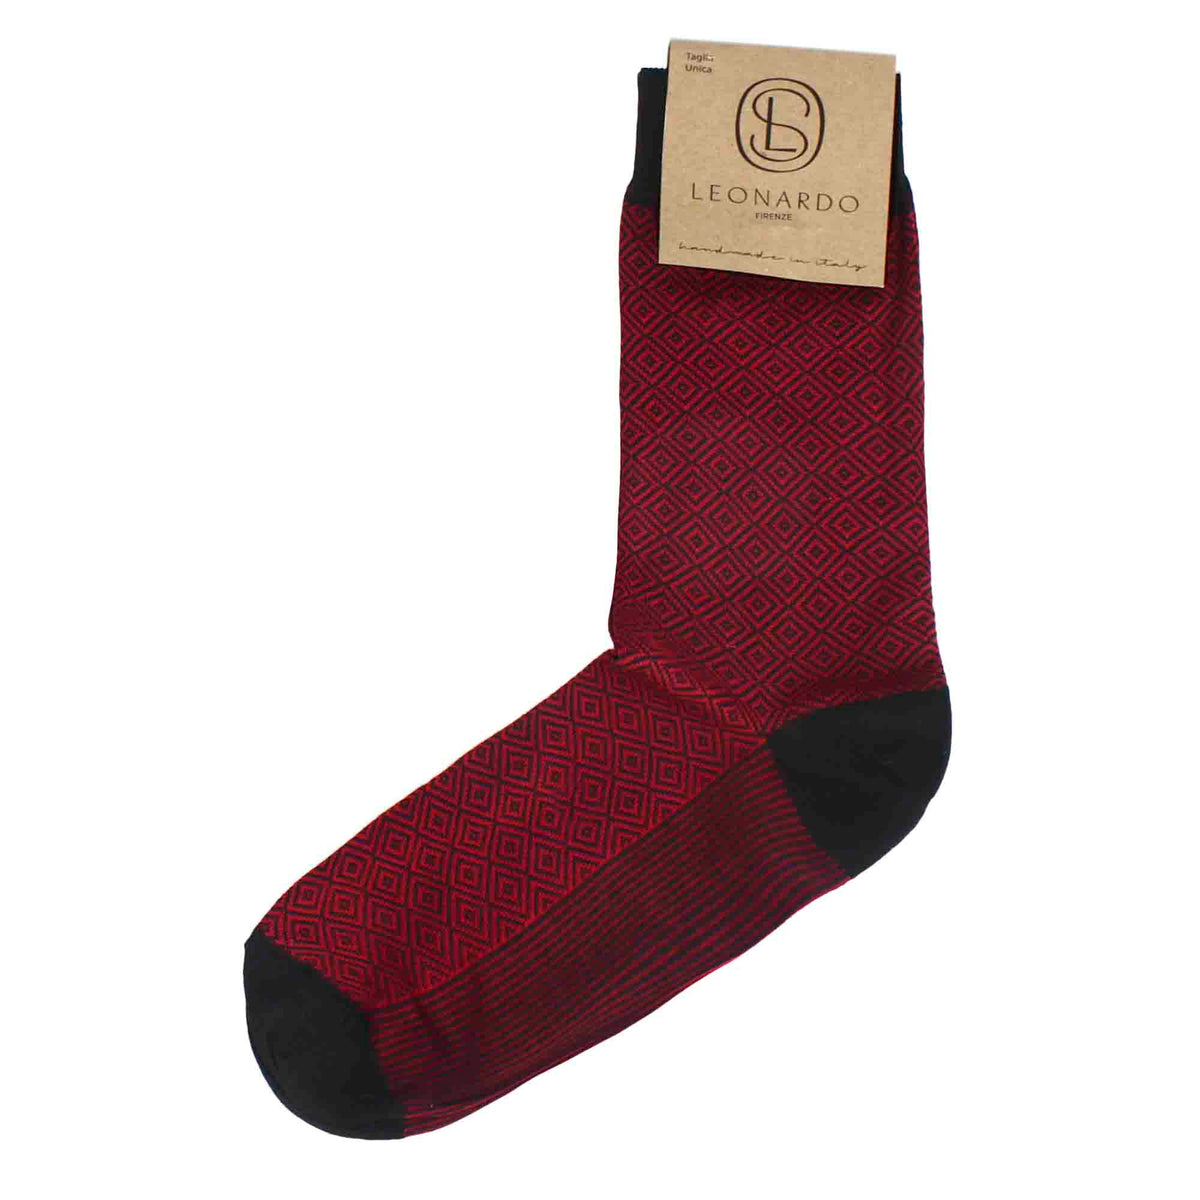 Men's socks in red cotton with black pattern